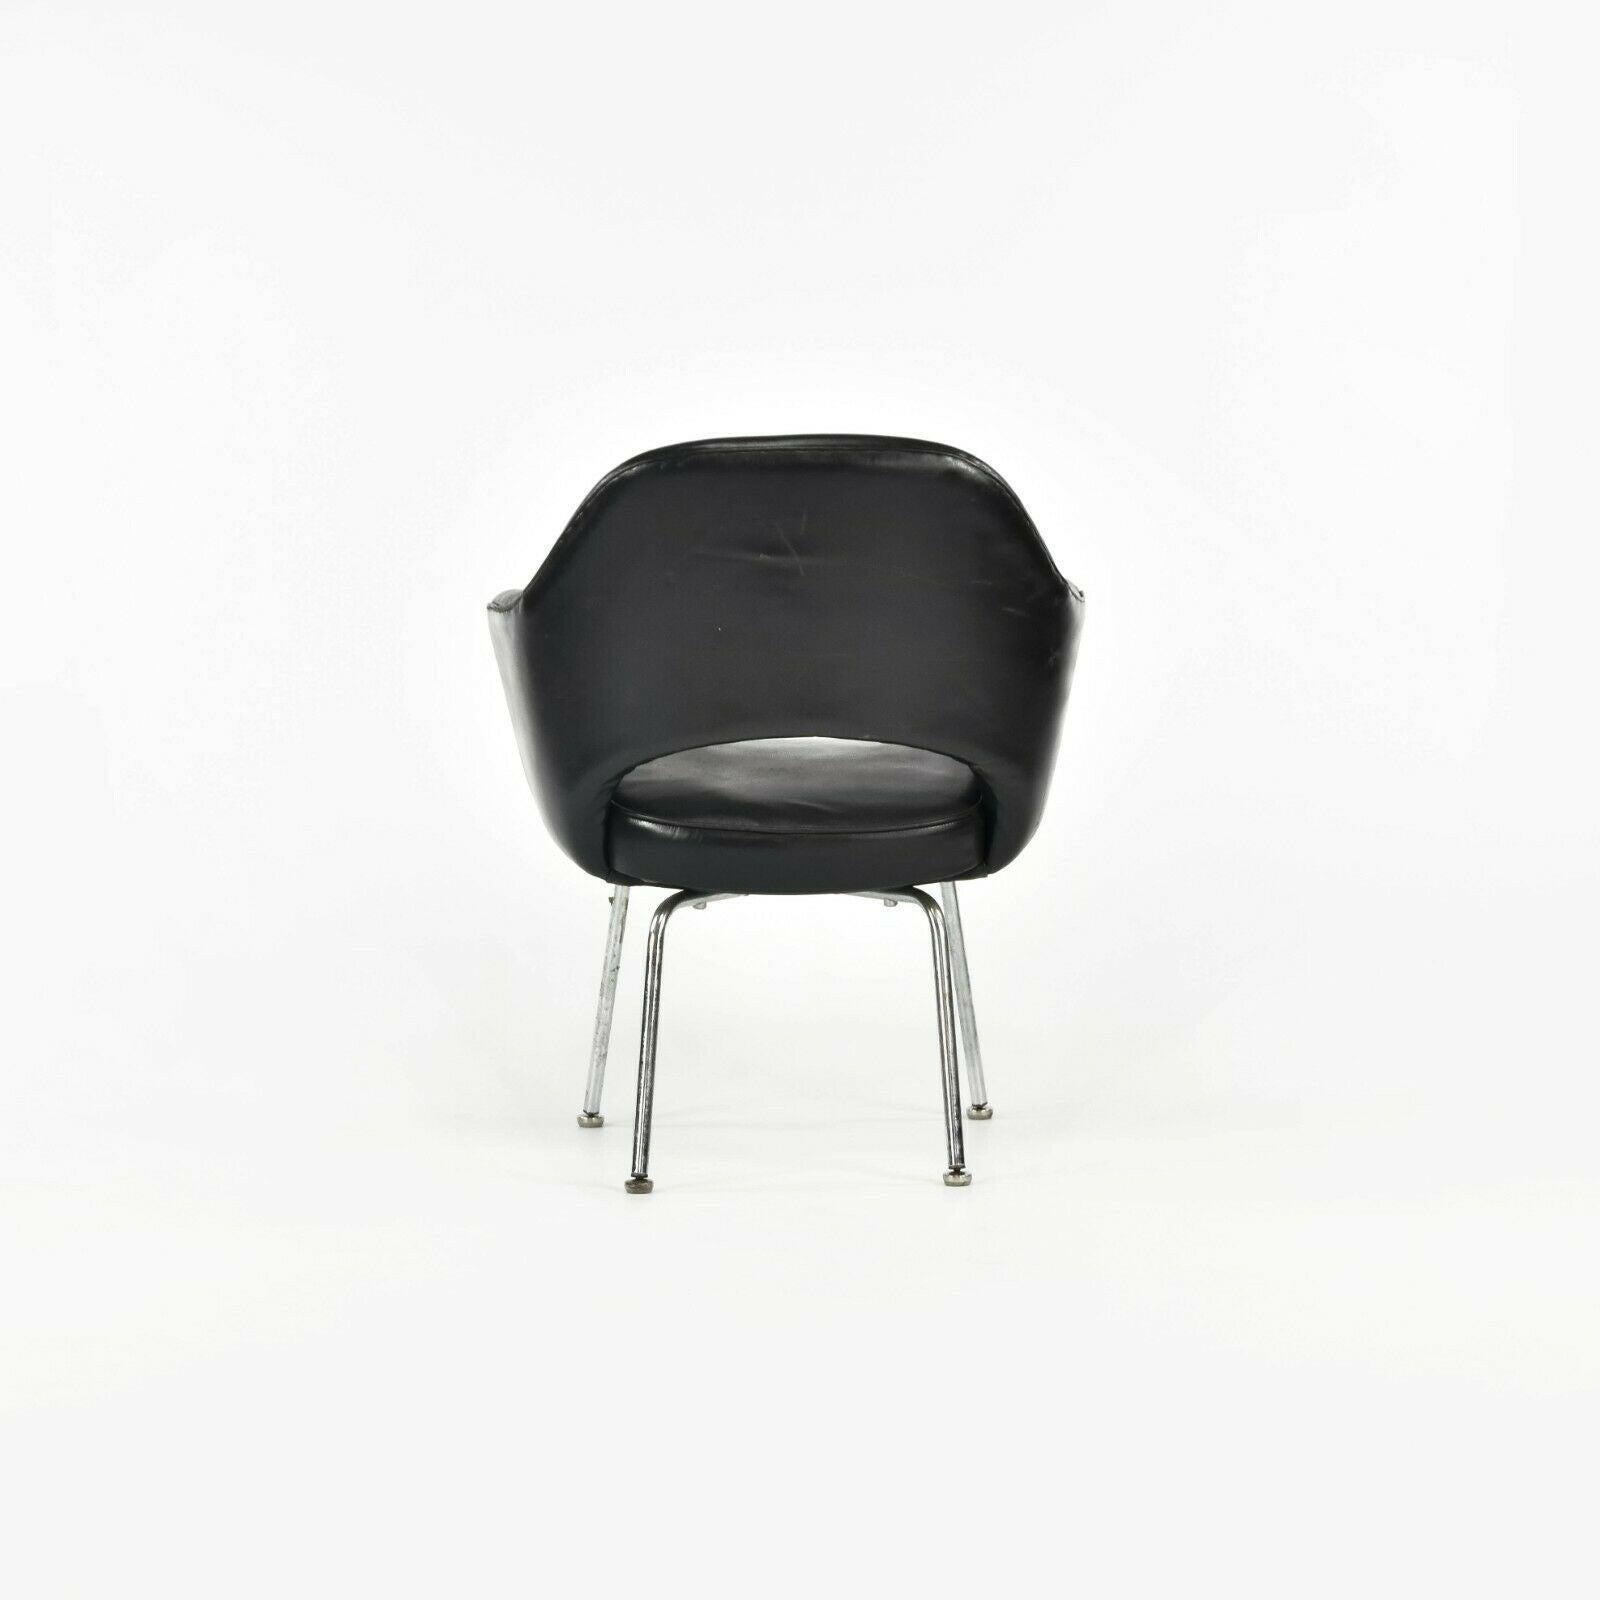 1960s Eero Saarinen for Knoll Executive Dining Arm Chair in Black Leather In Good Condition For Sale In Philadelphia, PA